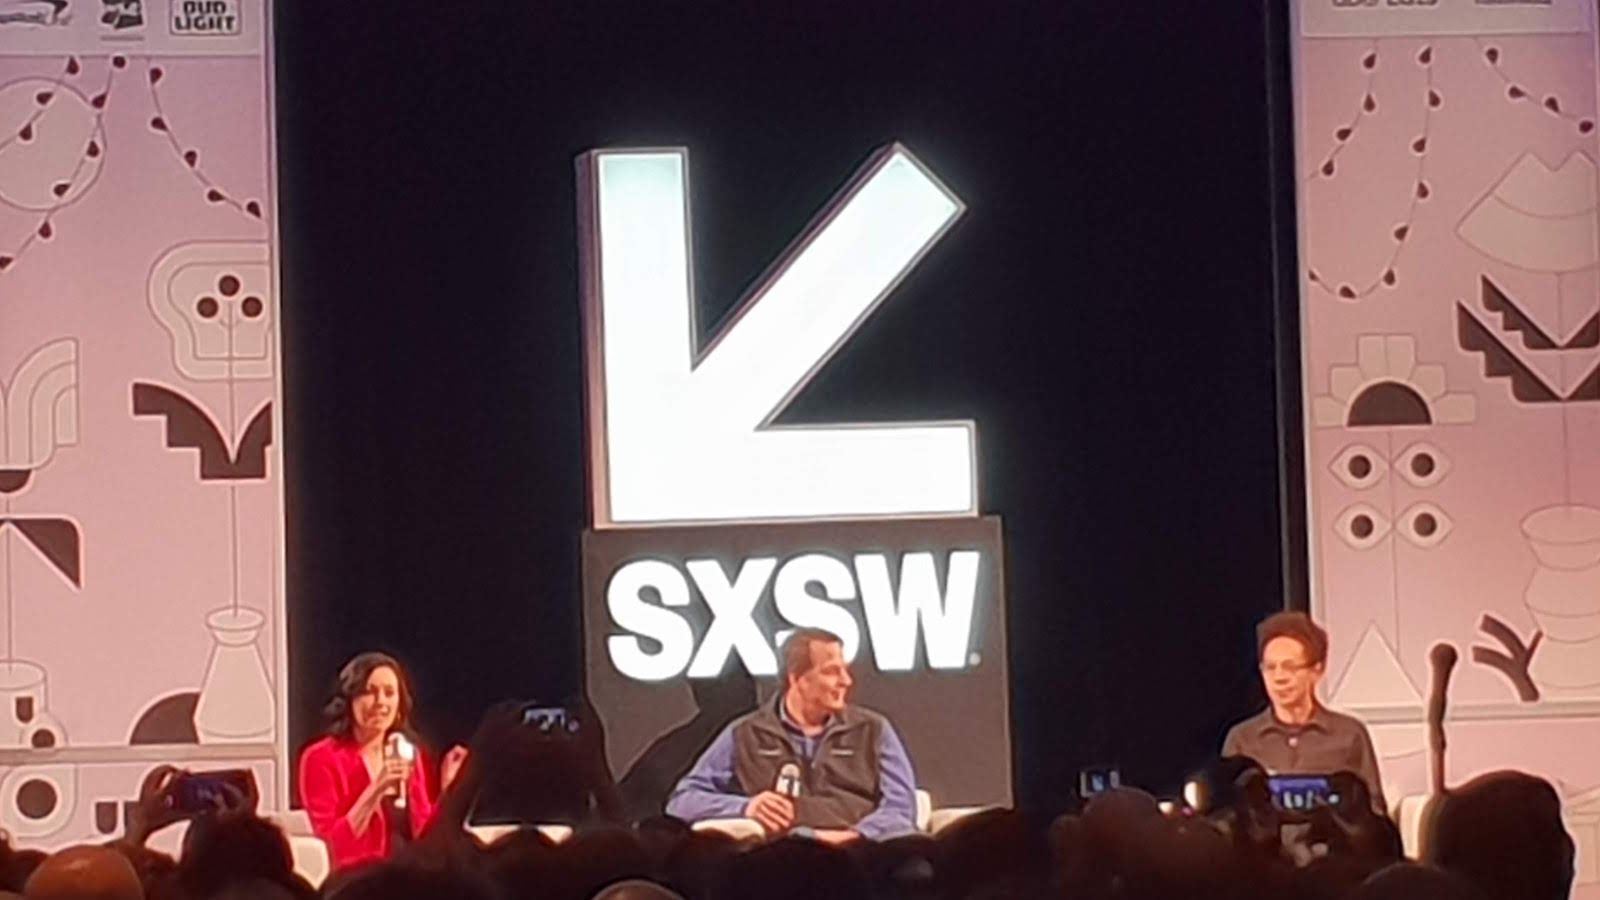 Chris Urmson and Malcolm Gladwell on stage at SXSW 2019